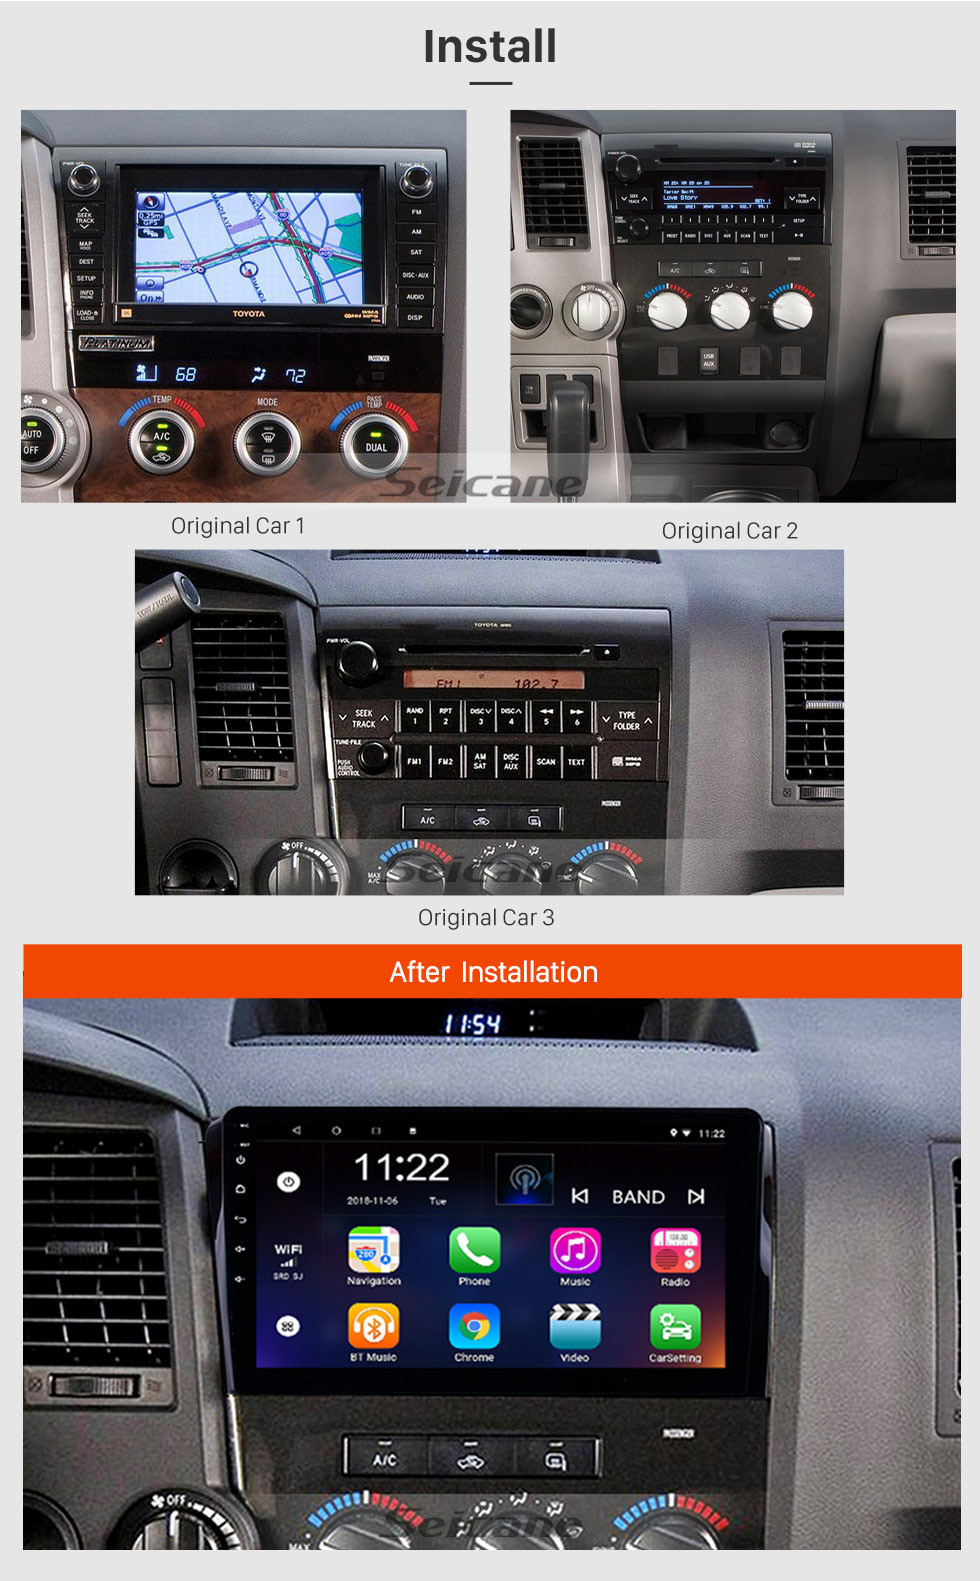 Seicane 10.1 inch HD touchscreen Radio GPS Navigation System Android 13.0 for 2008-2015 TOYOTA Sequoia 2006-2013 Tundra Support Radio Carplay Bluetooth OBD II DVR  WIFI Rear view camera 